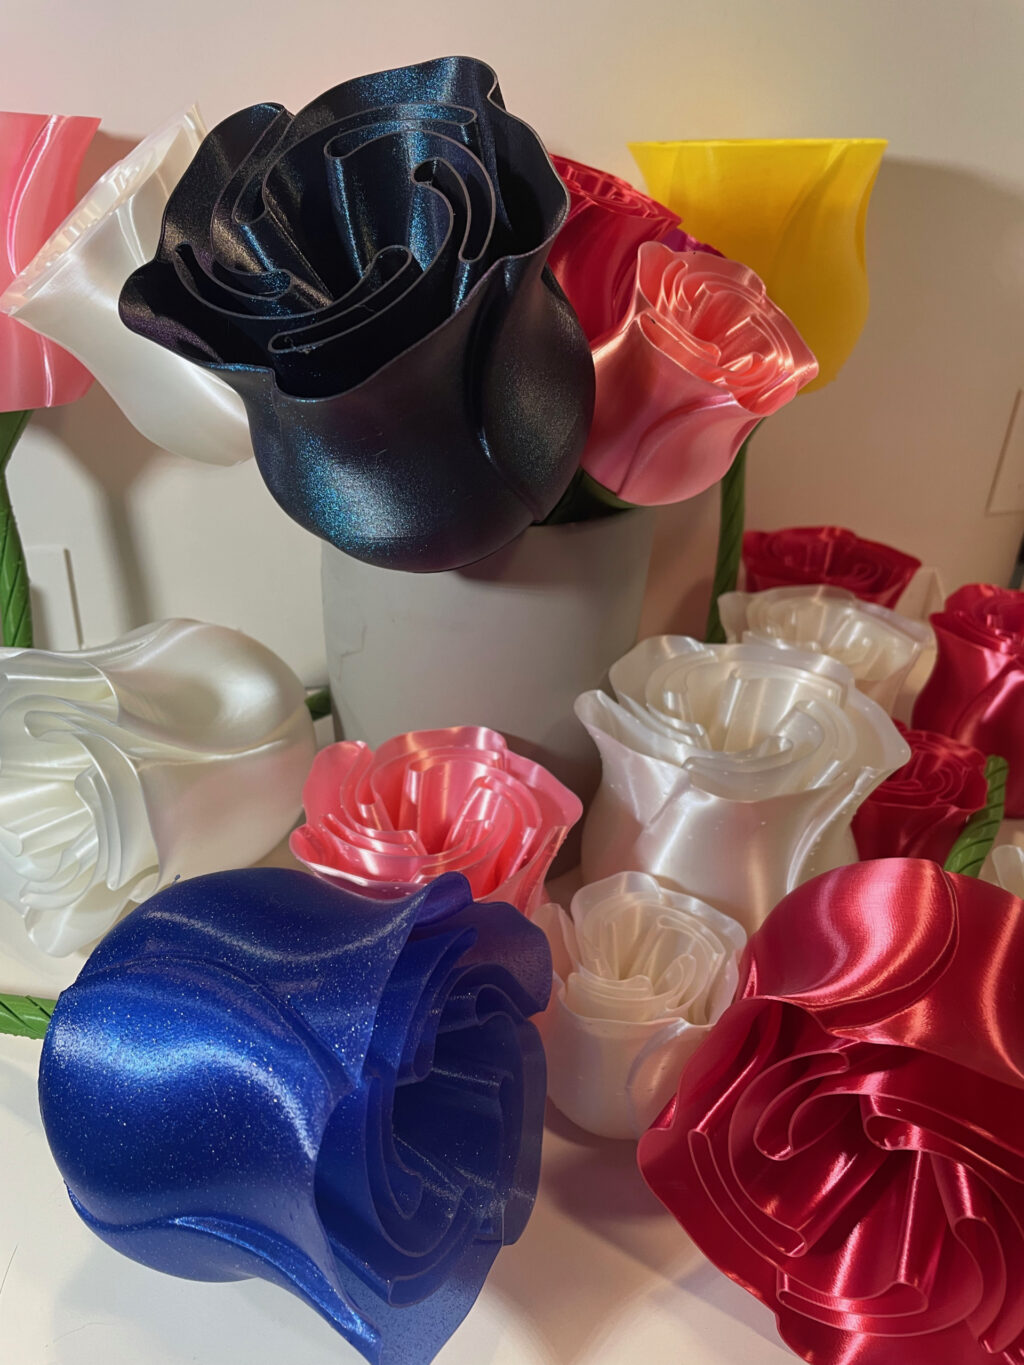 3D Printed Roses for Valentine's Day or Whenever